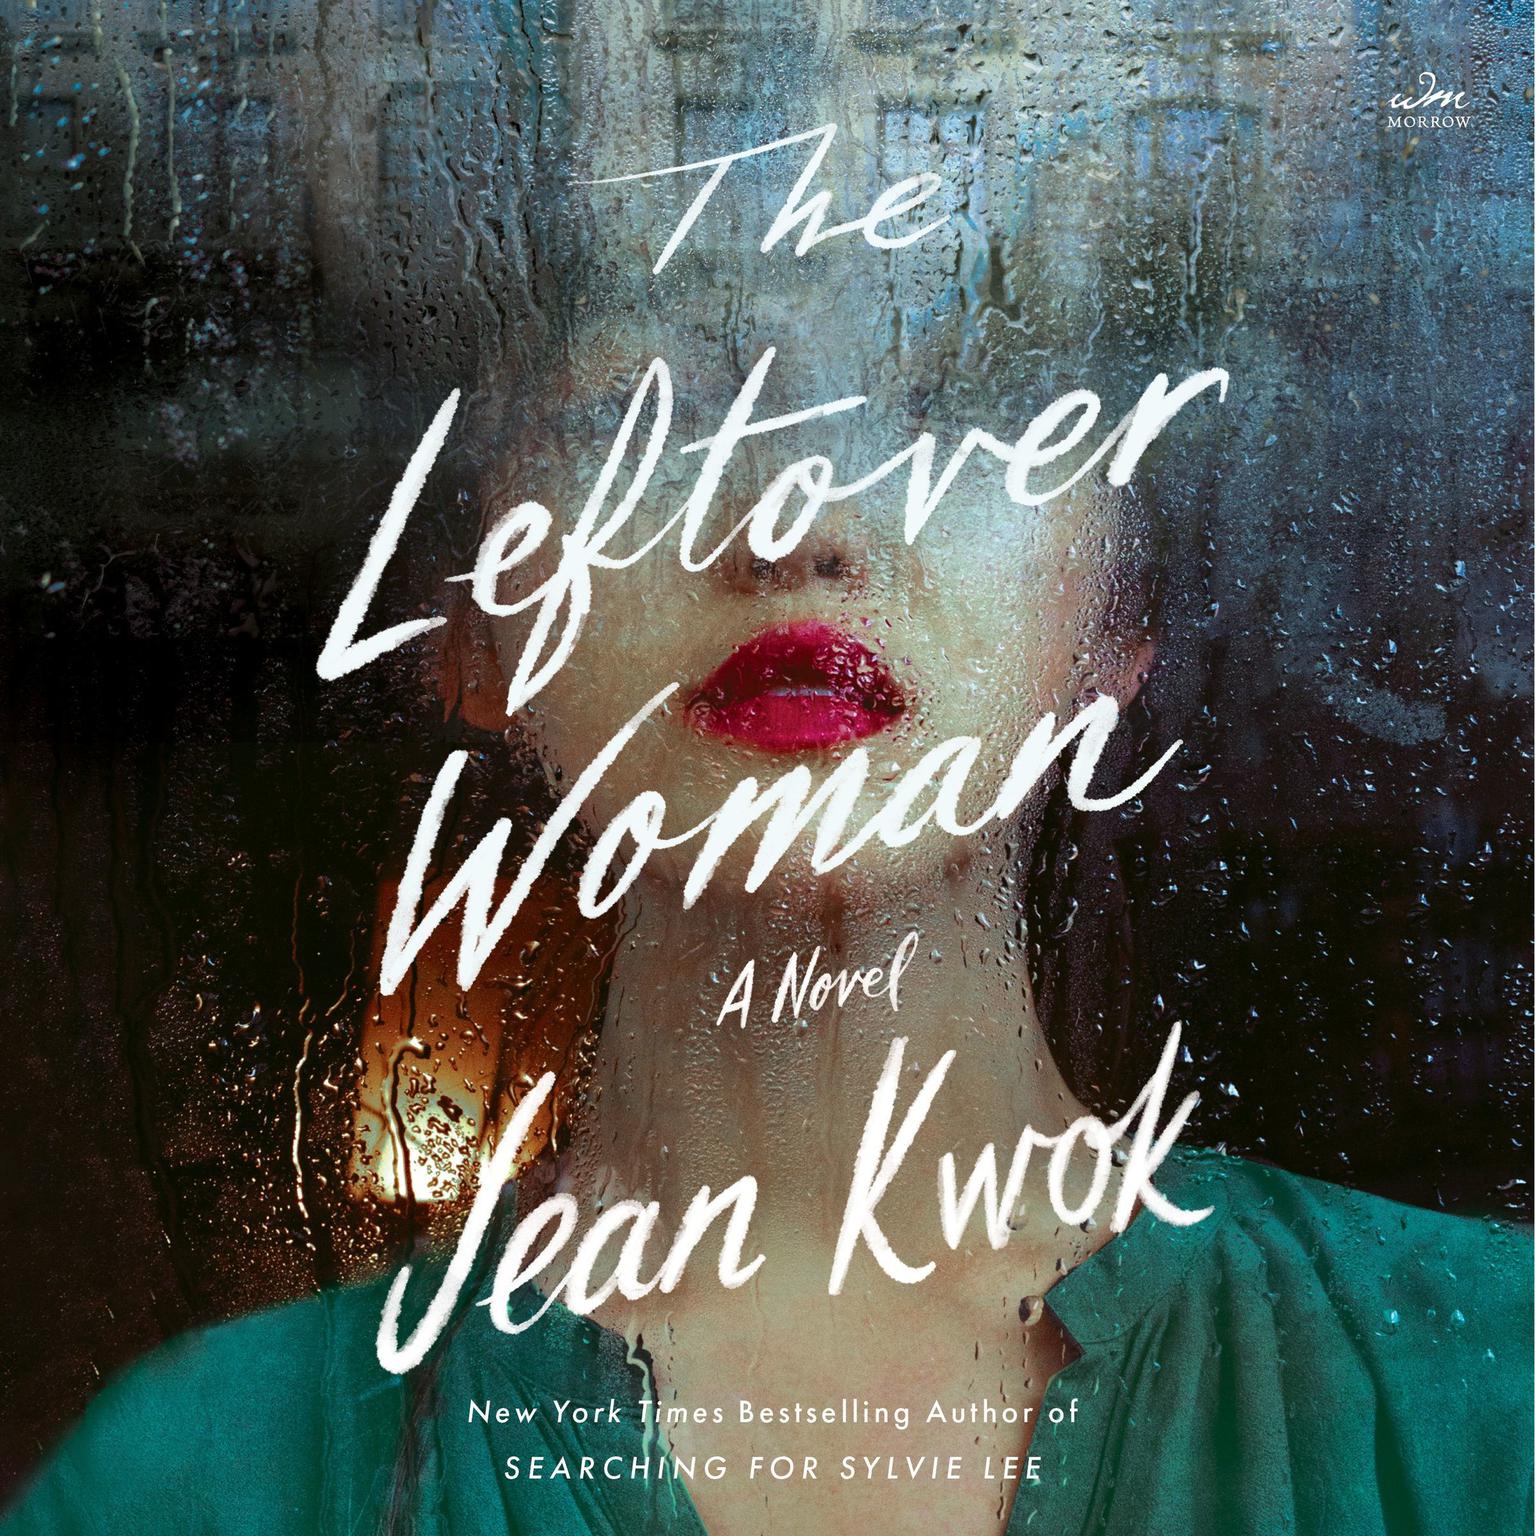 The Leftover Woman: A Novel Audiobook, by Jean Kwok